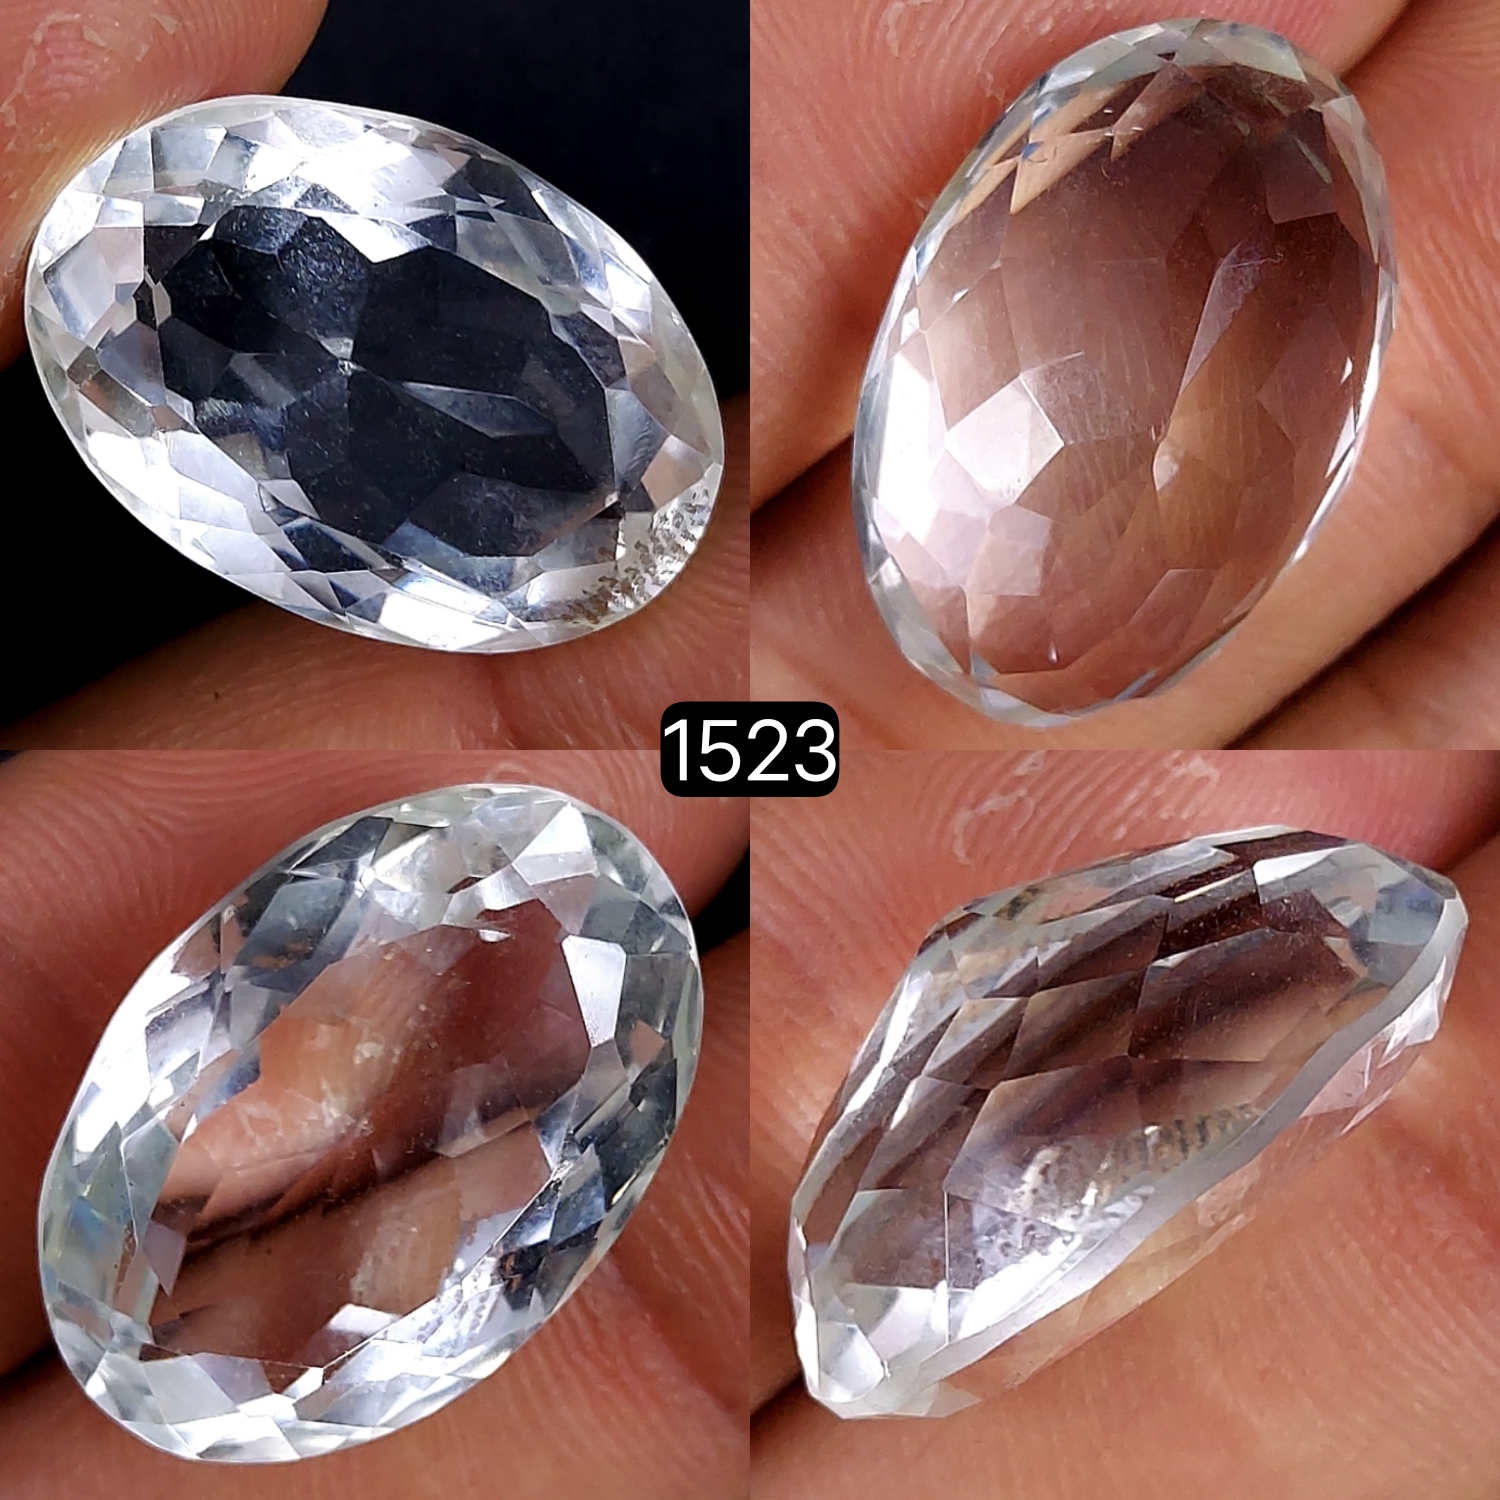 1Pc 28Cts Natural Crystal Quartz Faceted Cabochon Gemstone Oval Shape Crystal 24x18mm#1523